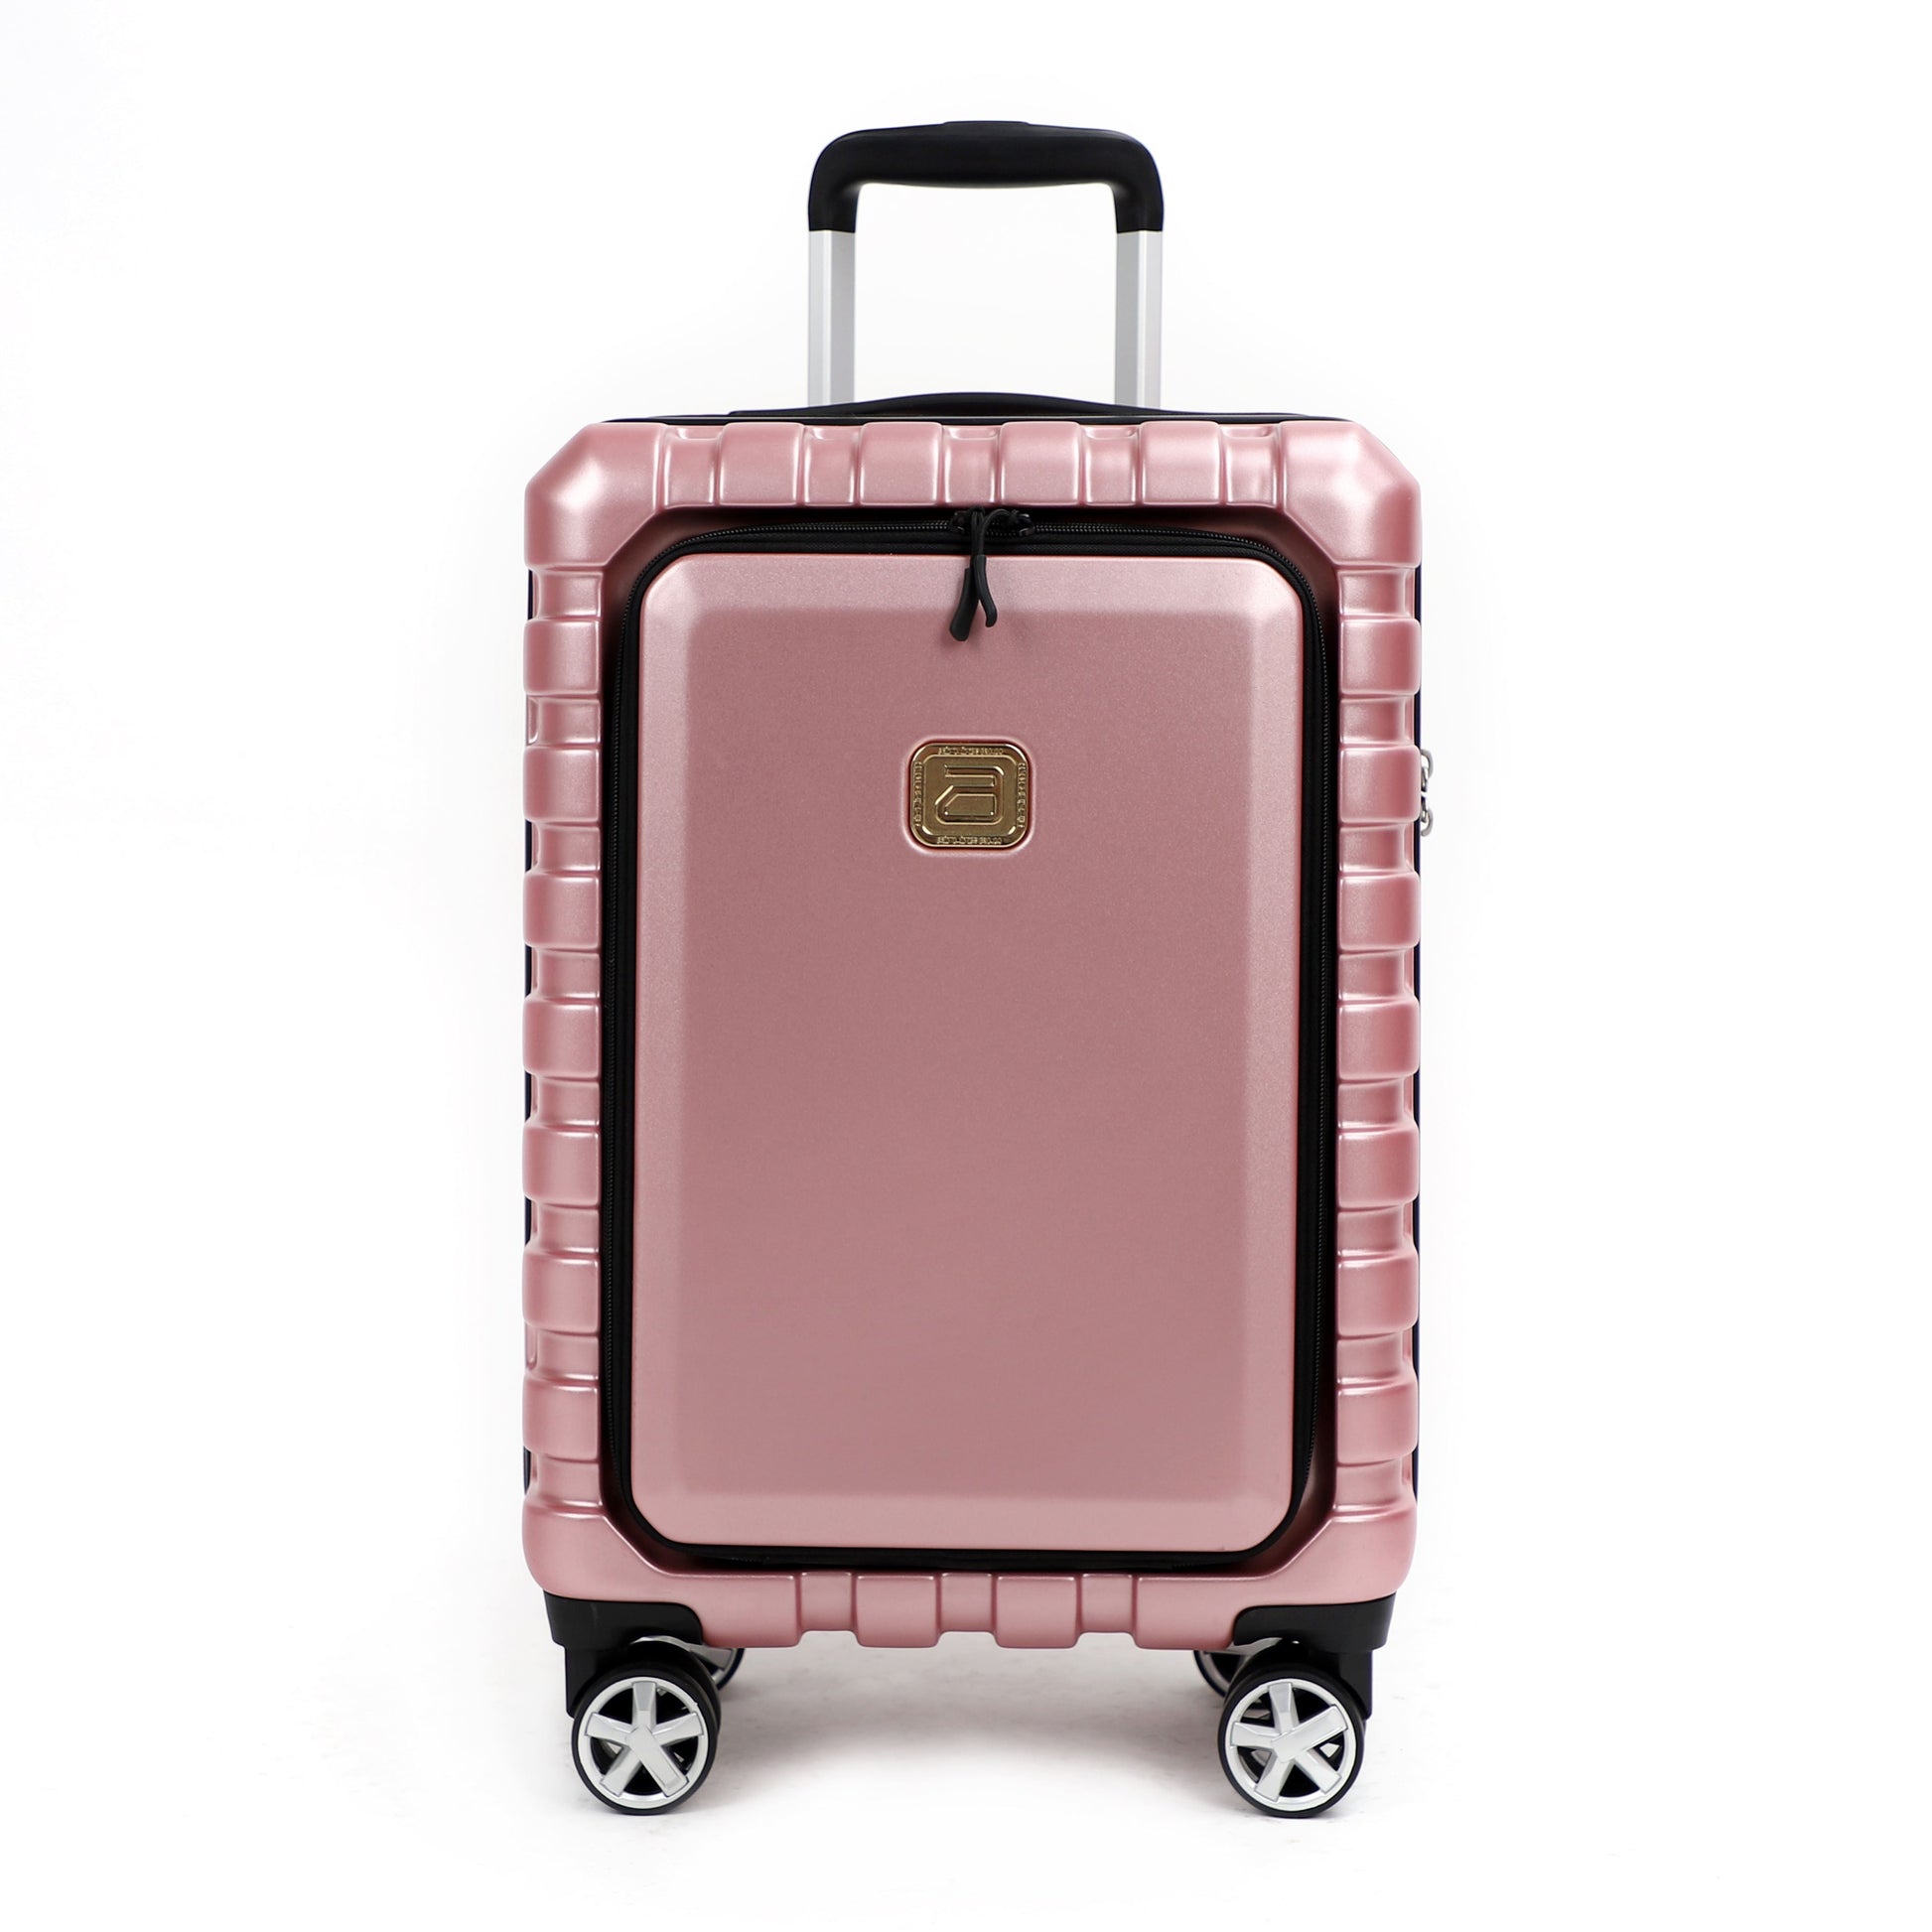 Airline_Carry_On_Luggage_Rose_Gold_front_view_20_inch_T1978155102